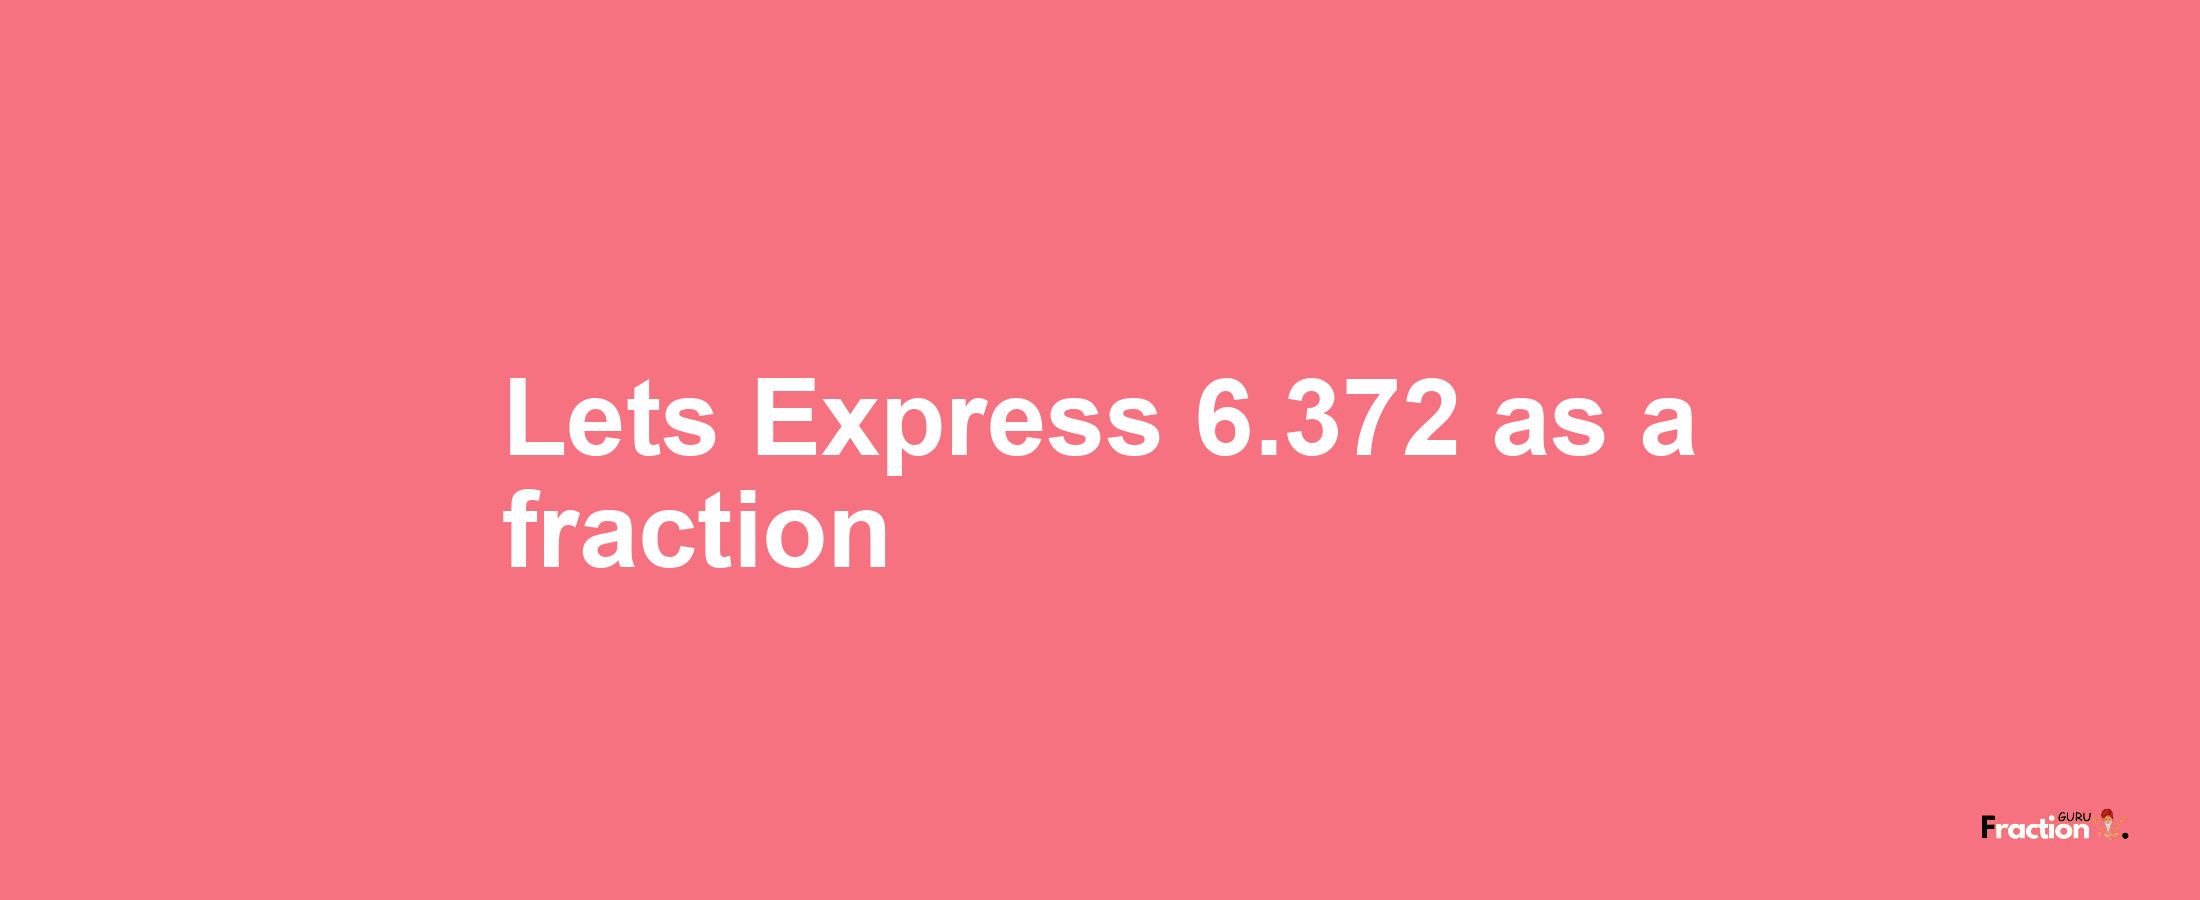 Lets Express 6.372 as afraction